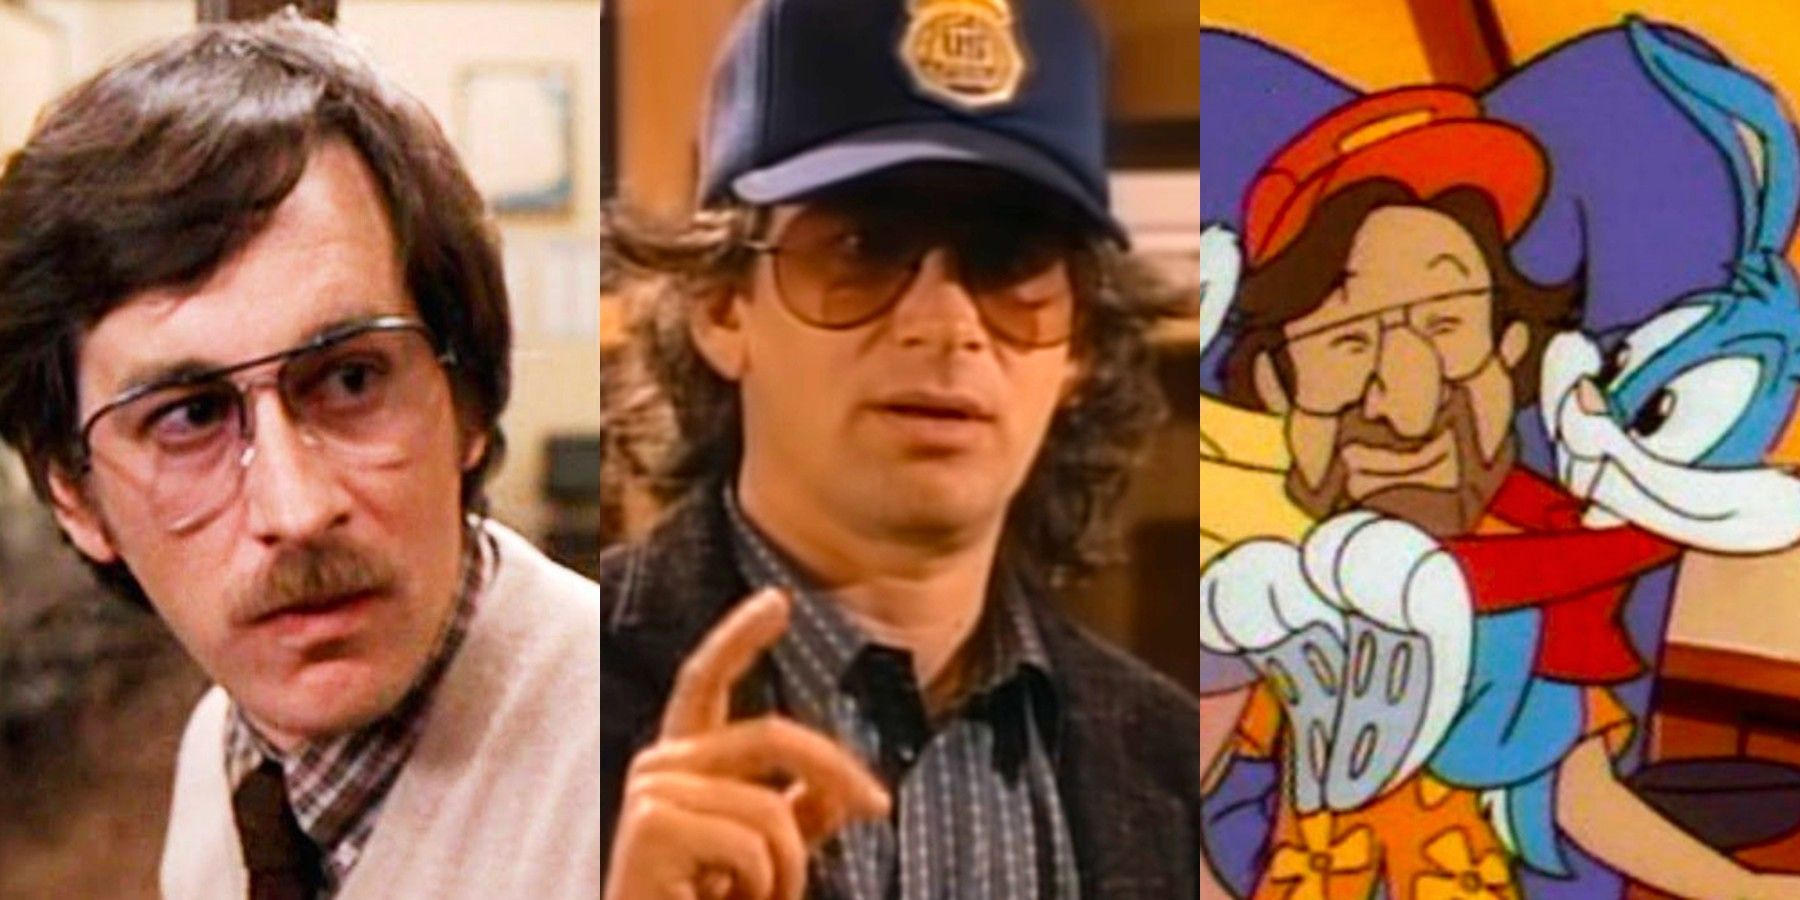 Spllit image: Steven Spielberg cameos in The Blues Brothers, Goonies and Tiny Toons Adventures.